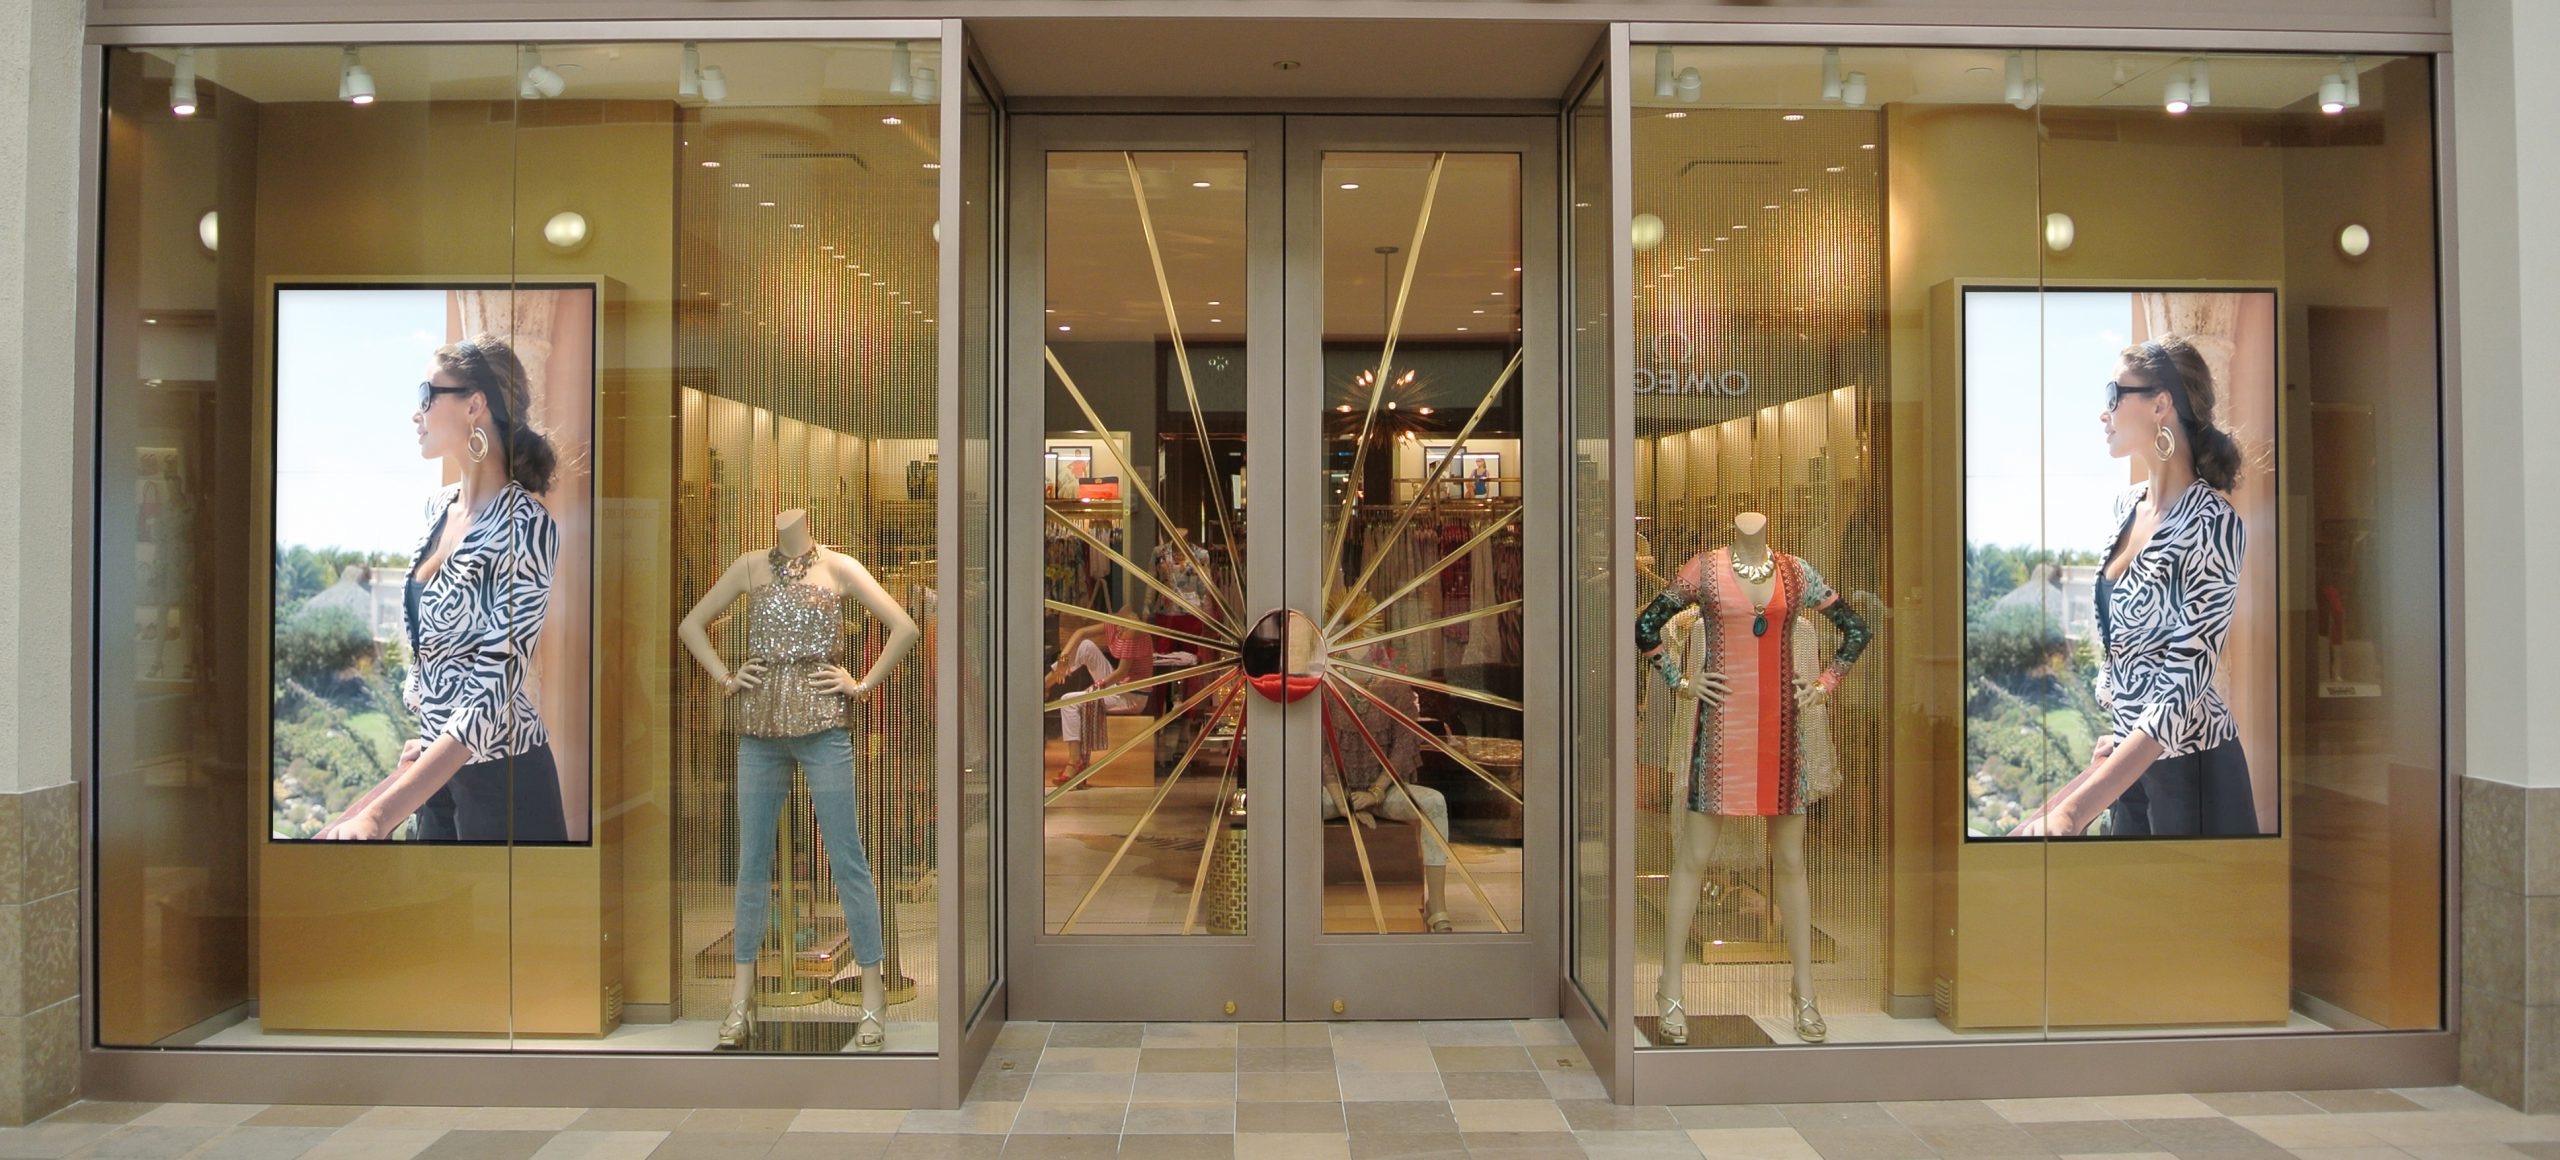 Window Digital Signage for stores -8